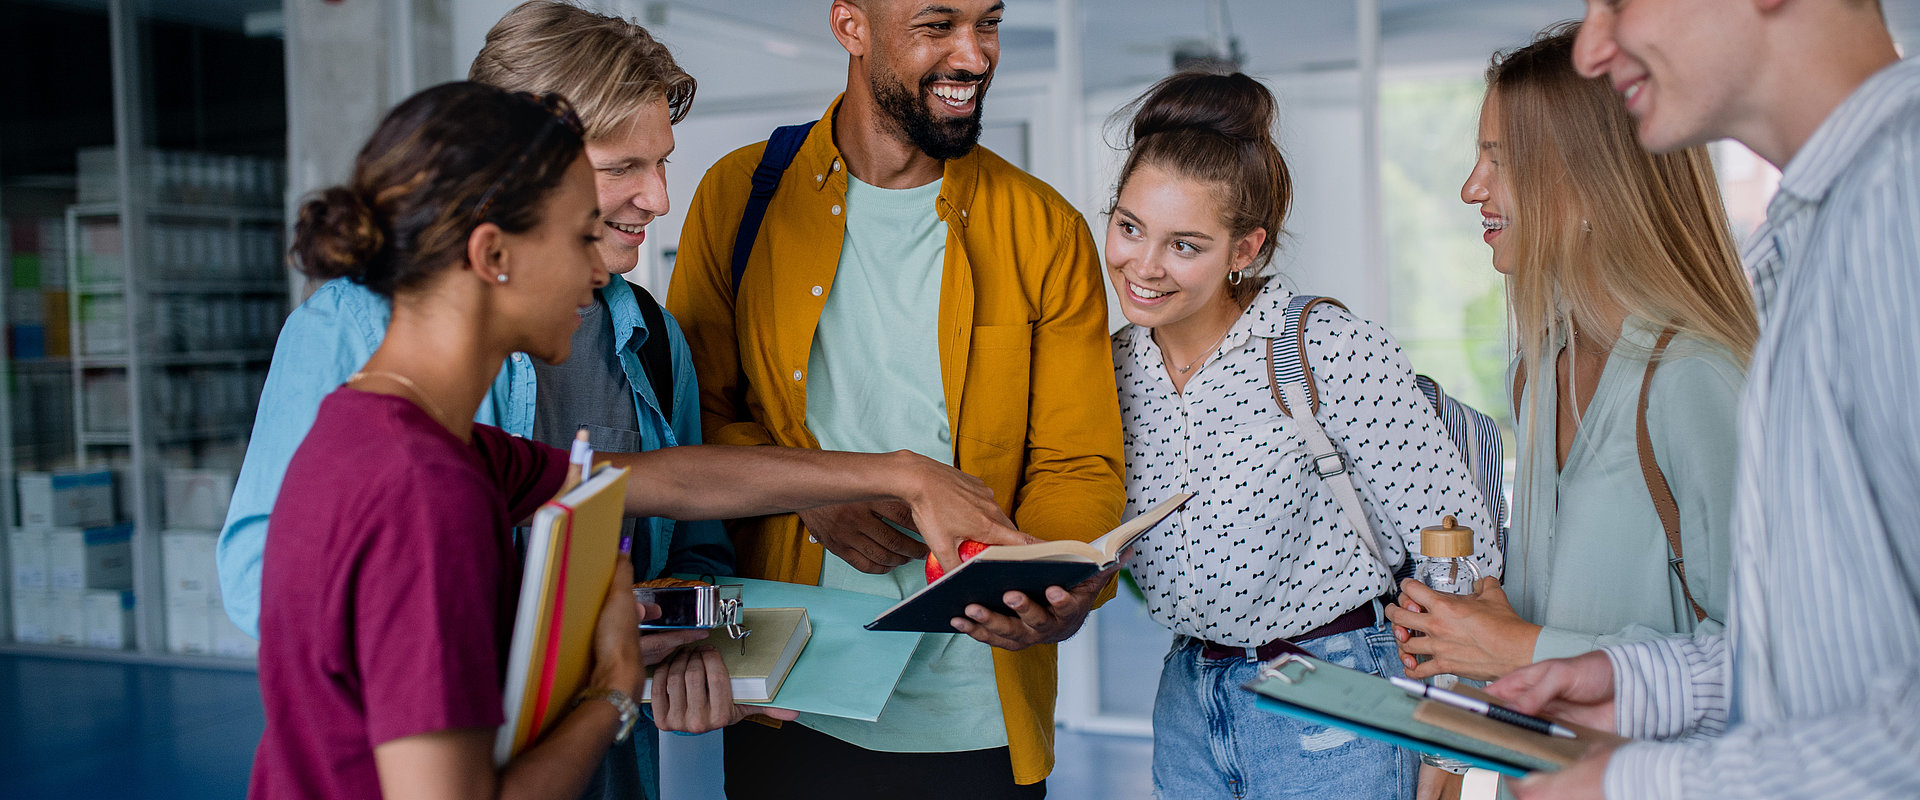 The Faculty of Business Economics and Entrepreneurship (PEP) in cooperation with the Erasmus+ program from the school year 2022/2023 enabled its students to go on scholarship-based mobility trips that can be implemented in a large number of EU countries.